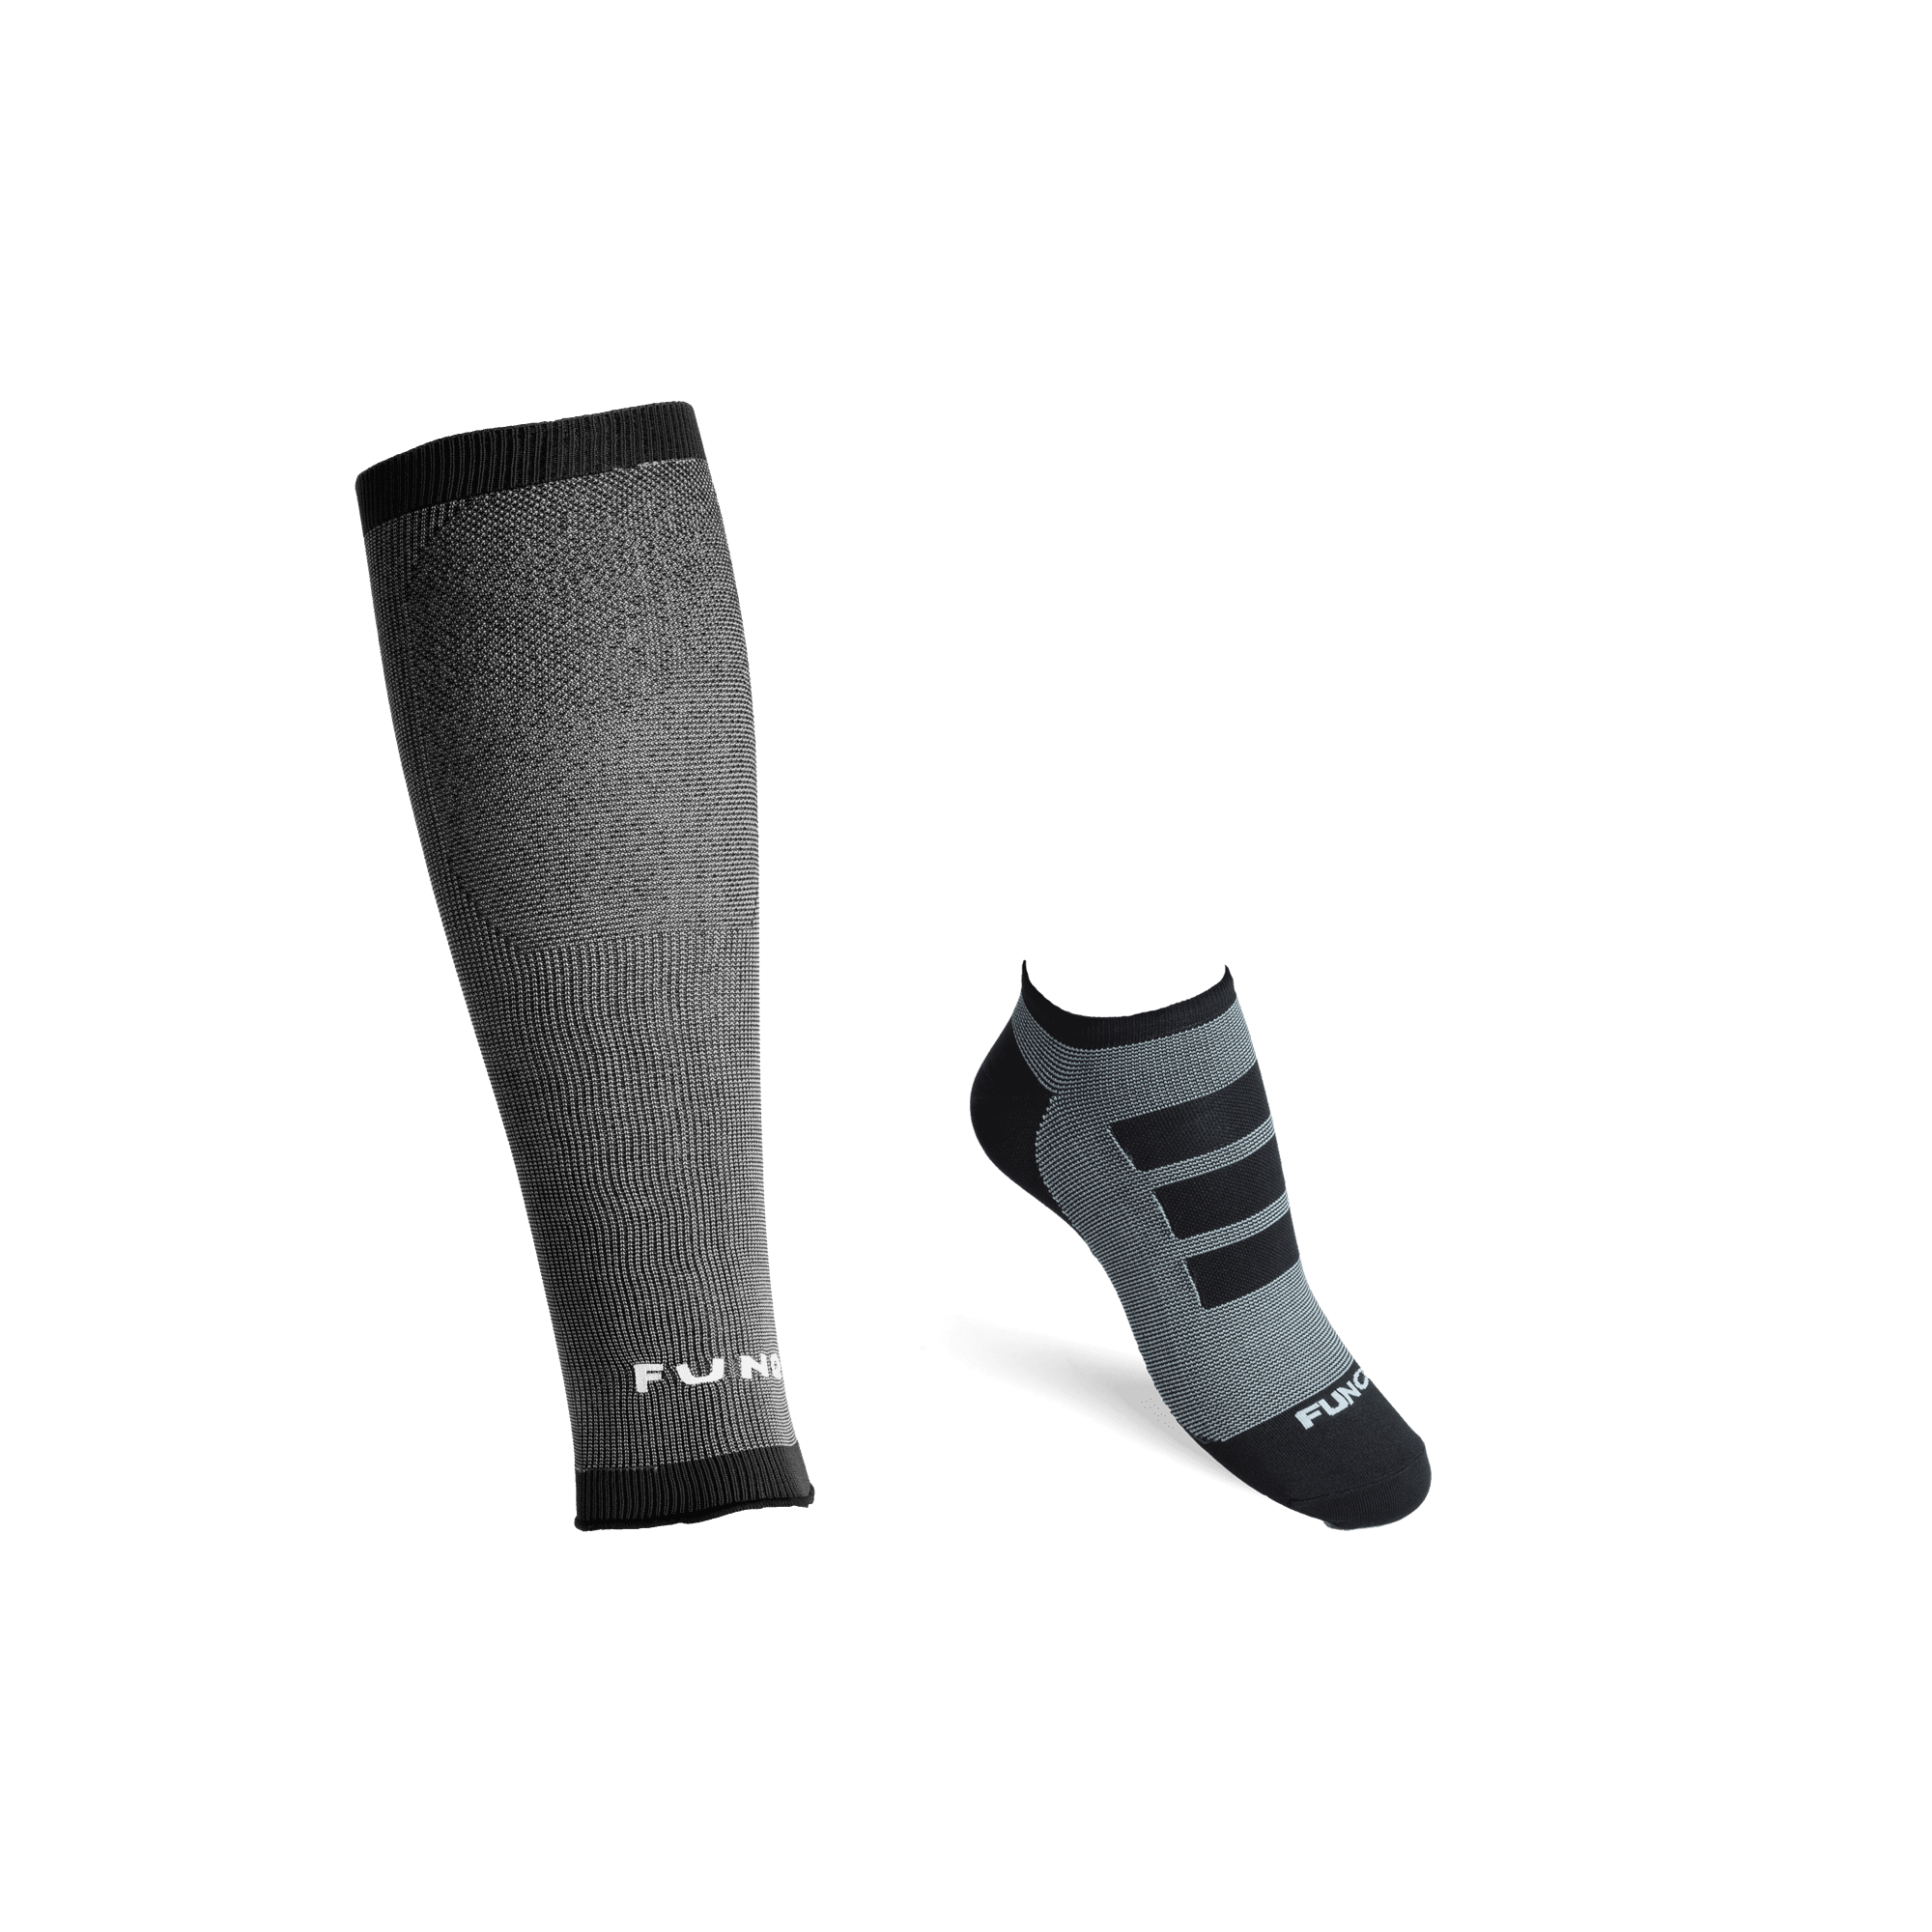 1-PACK LIGHTWEIGHT SUPPORTS & SOCKS